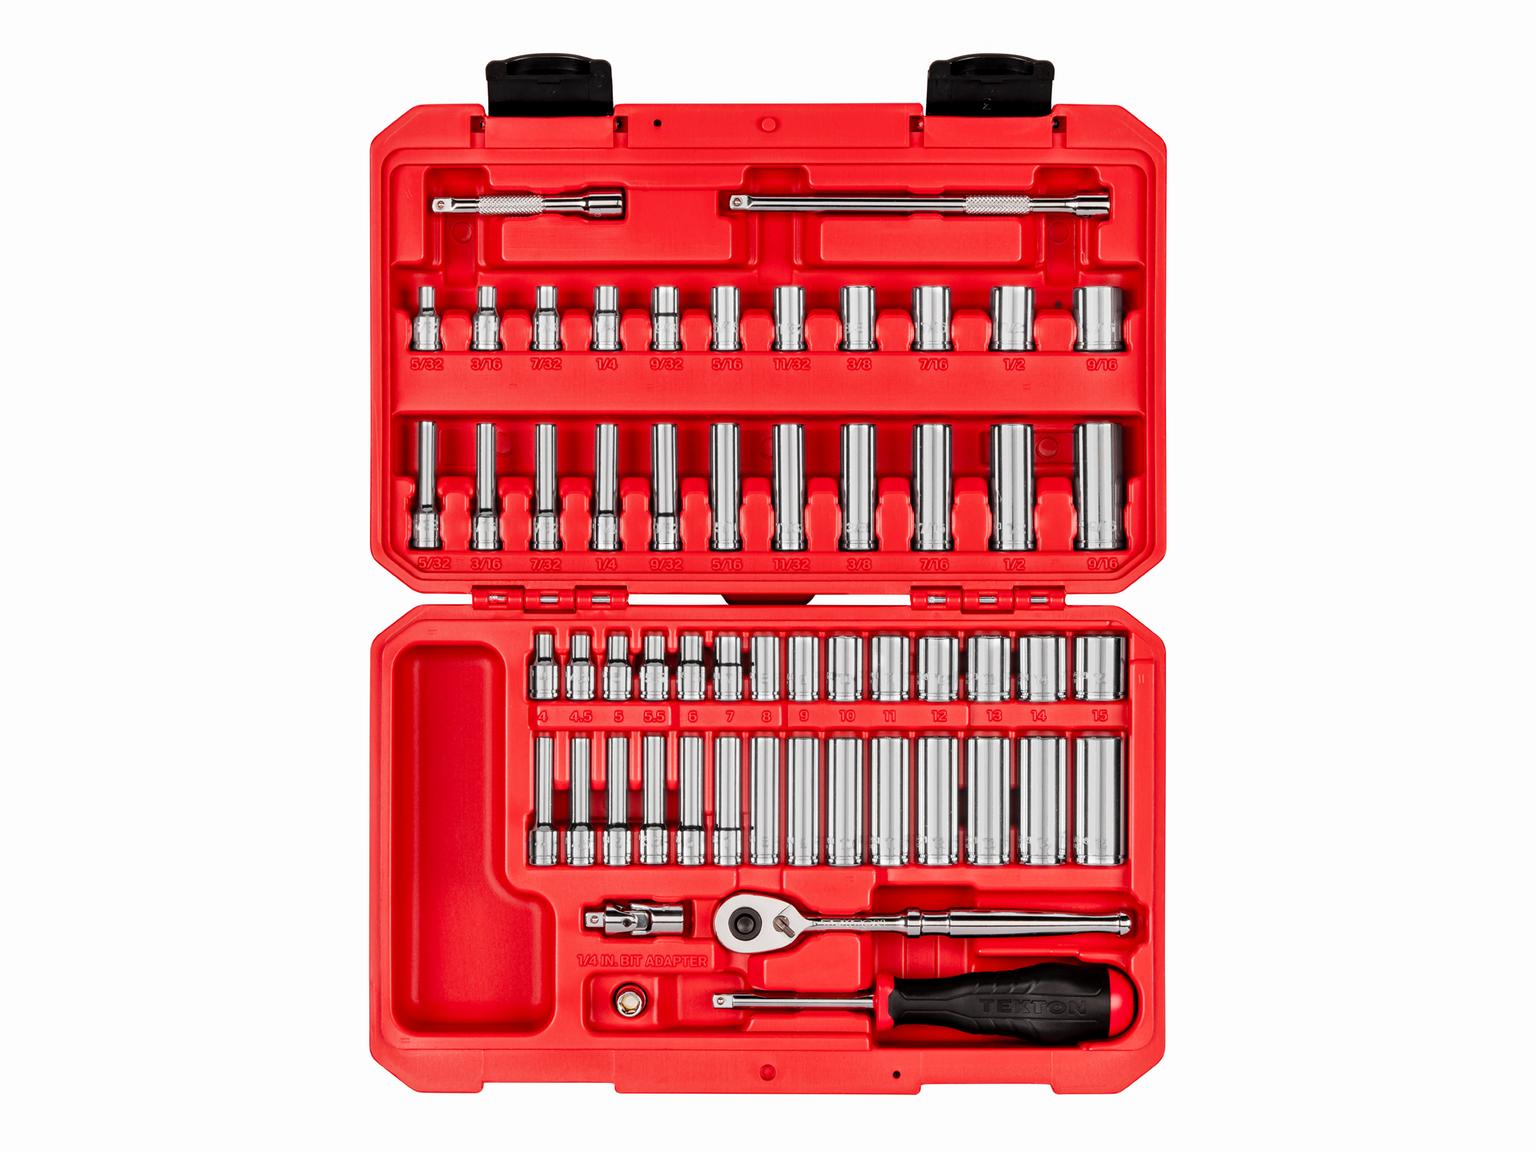 TEKTON SKT05303-D 1/4 Inch Drive 6-Point Socket and Ratchet Set, 56-Piece (5/32 - 9/16 in., 4 - 15 mm)